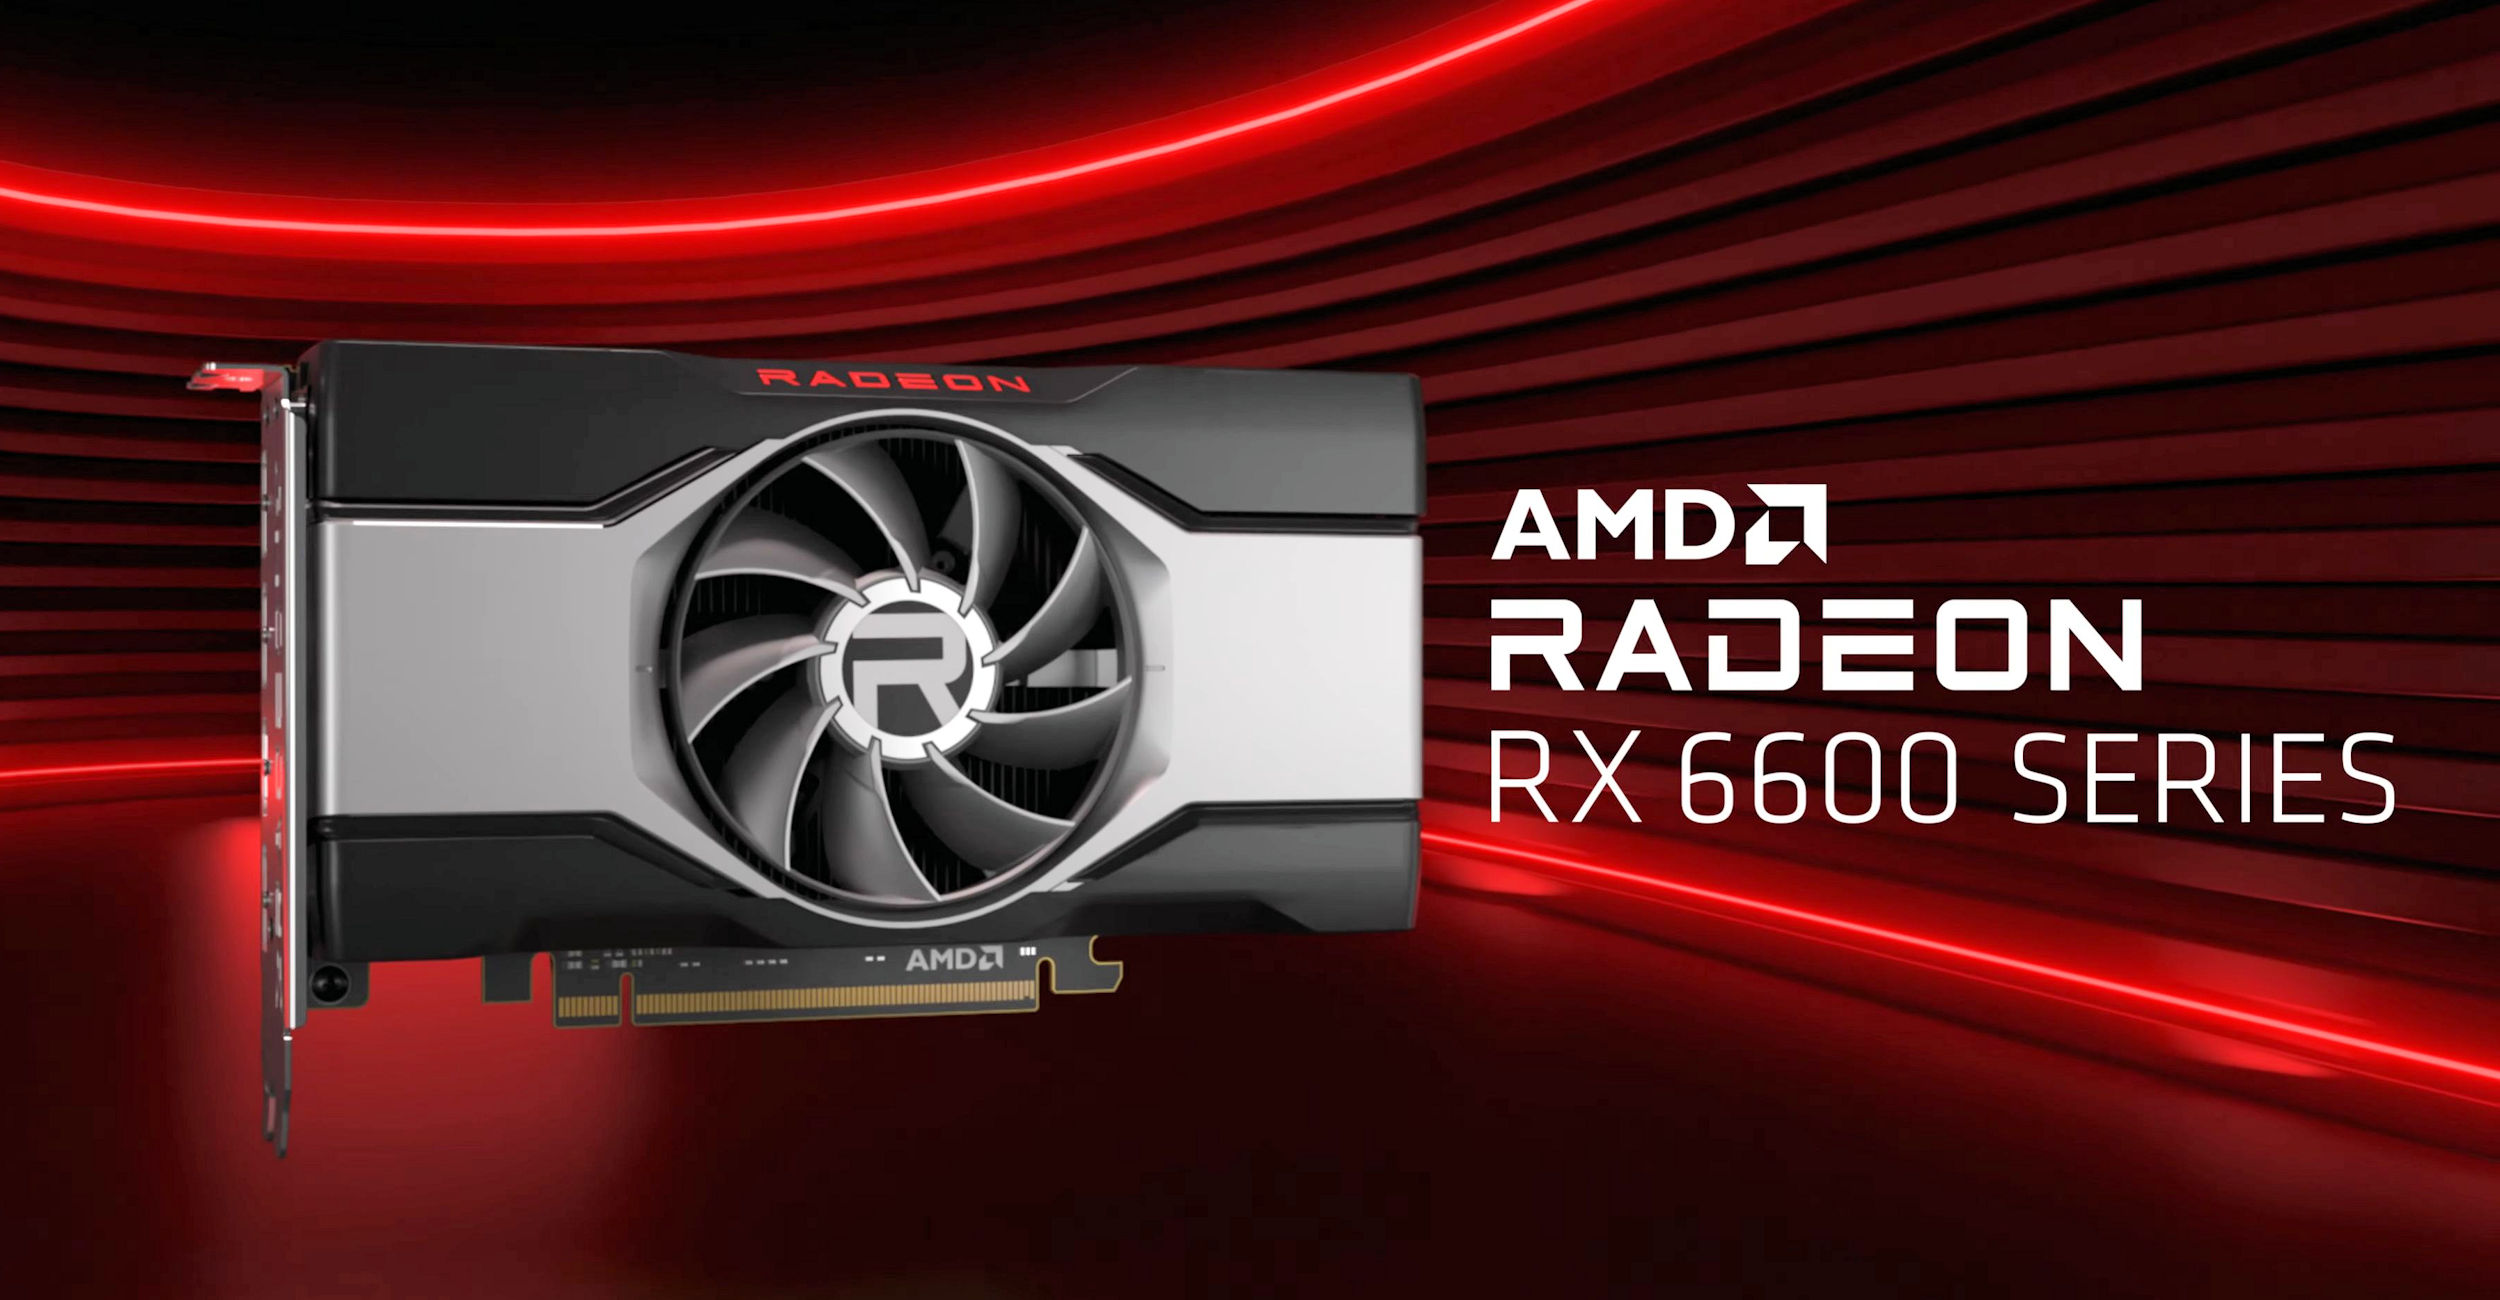 AMD Radeon RX 6600 with 8GB memory is now available for $180 in